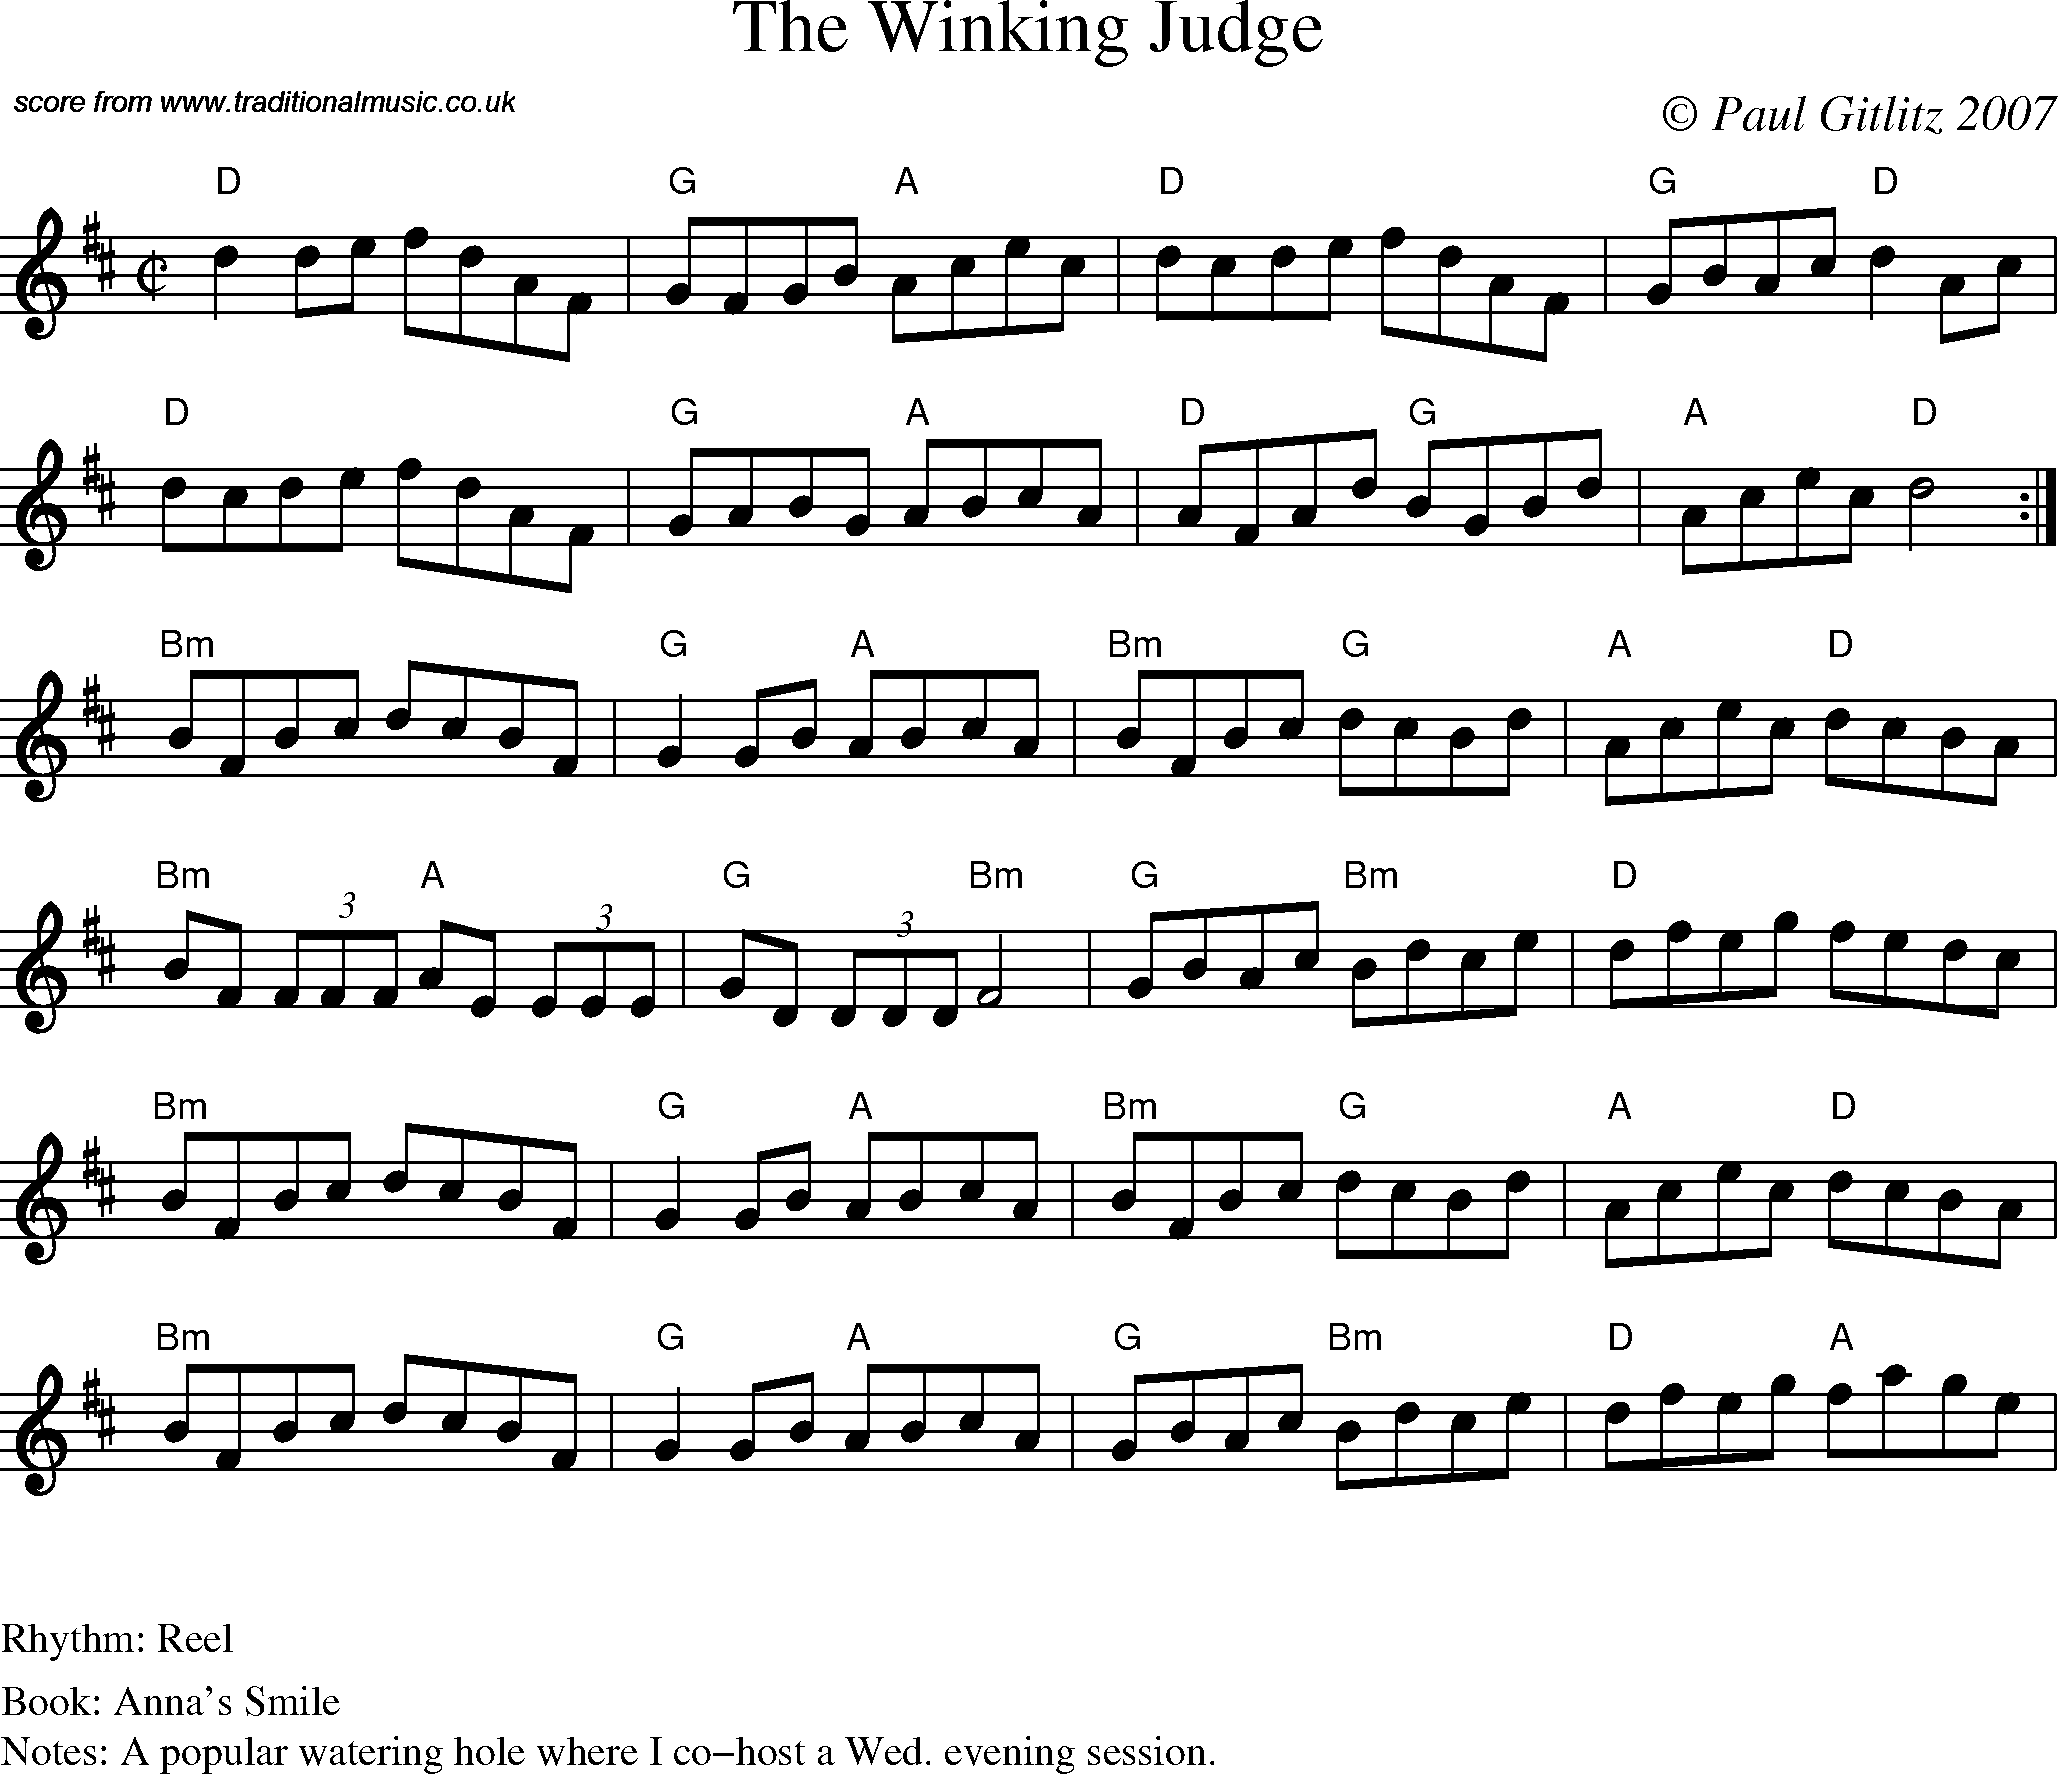 Sheet Music Score for Reel - The Winking Judge